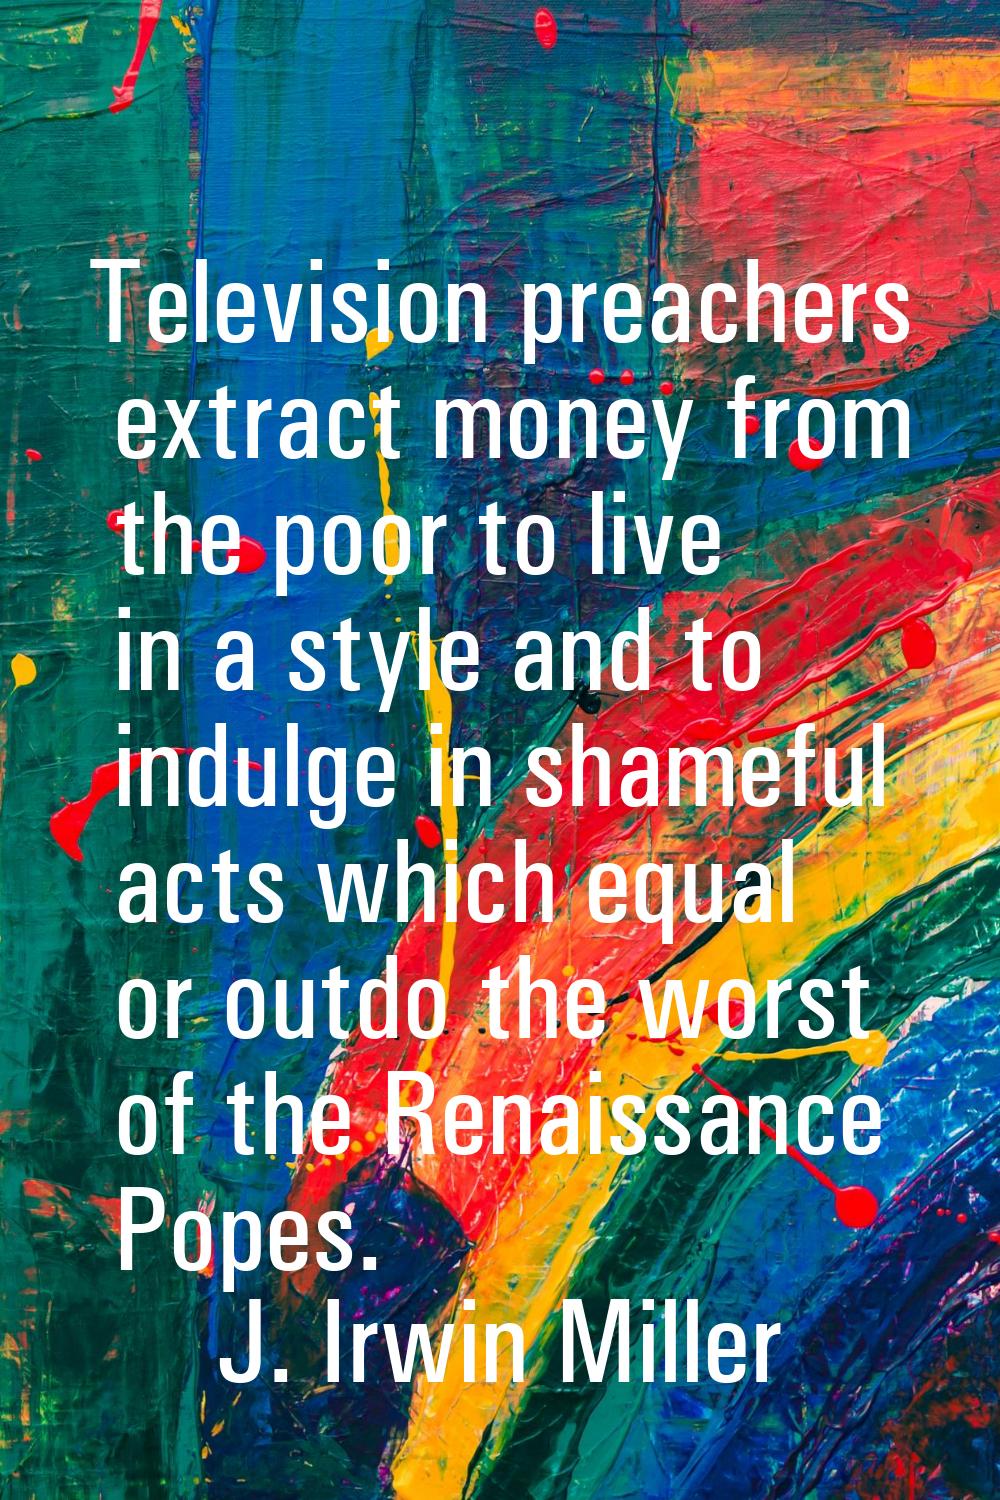 Television preachers extract money from the poor to live in a style and to indulge in shameful acts